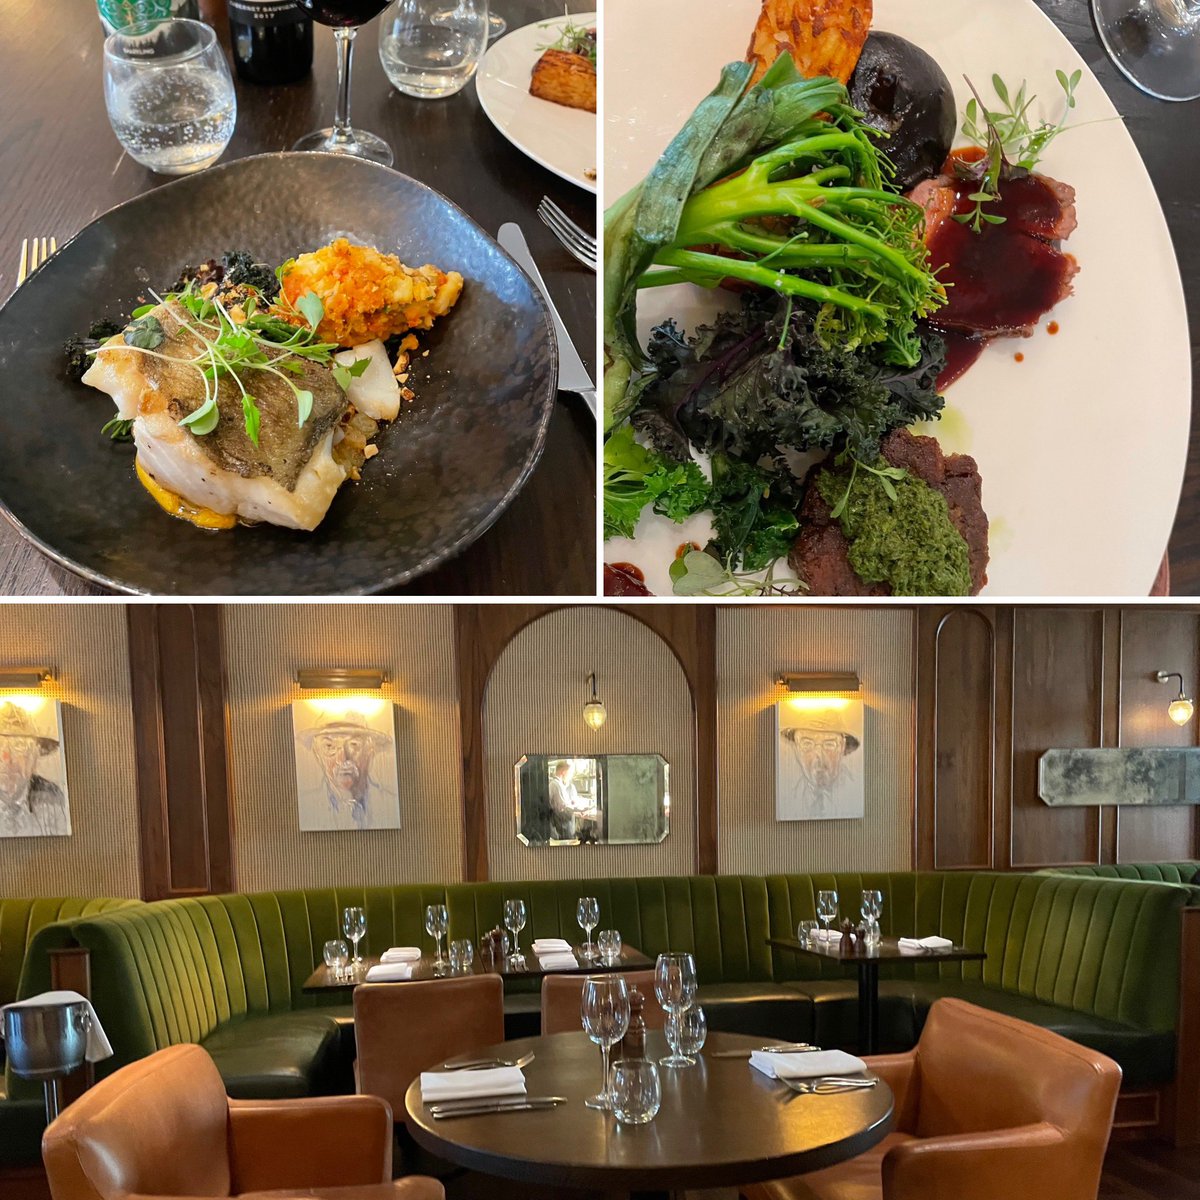 Forgotten how fabulous @ShuRestaurant is! Been far too long! Loving the ‘new’ decor ( 12 months but new to us!) & the same old welcome! #BelfastRestaurants #FineDiningNI